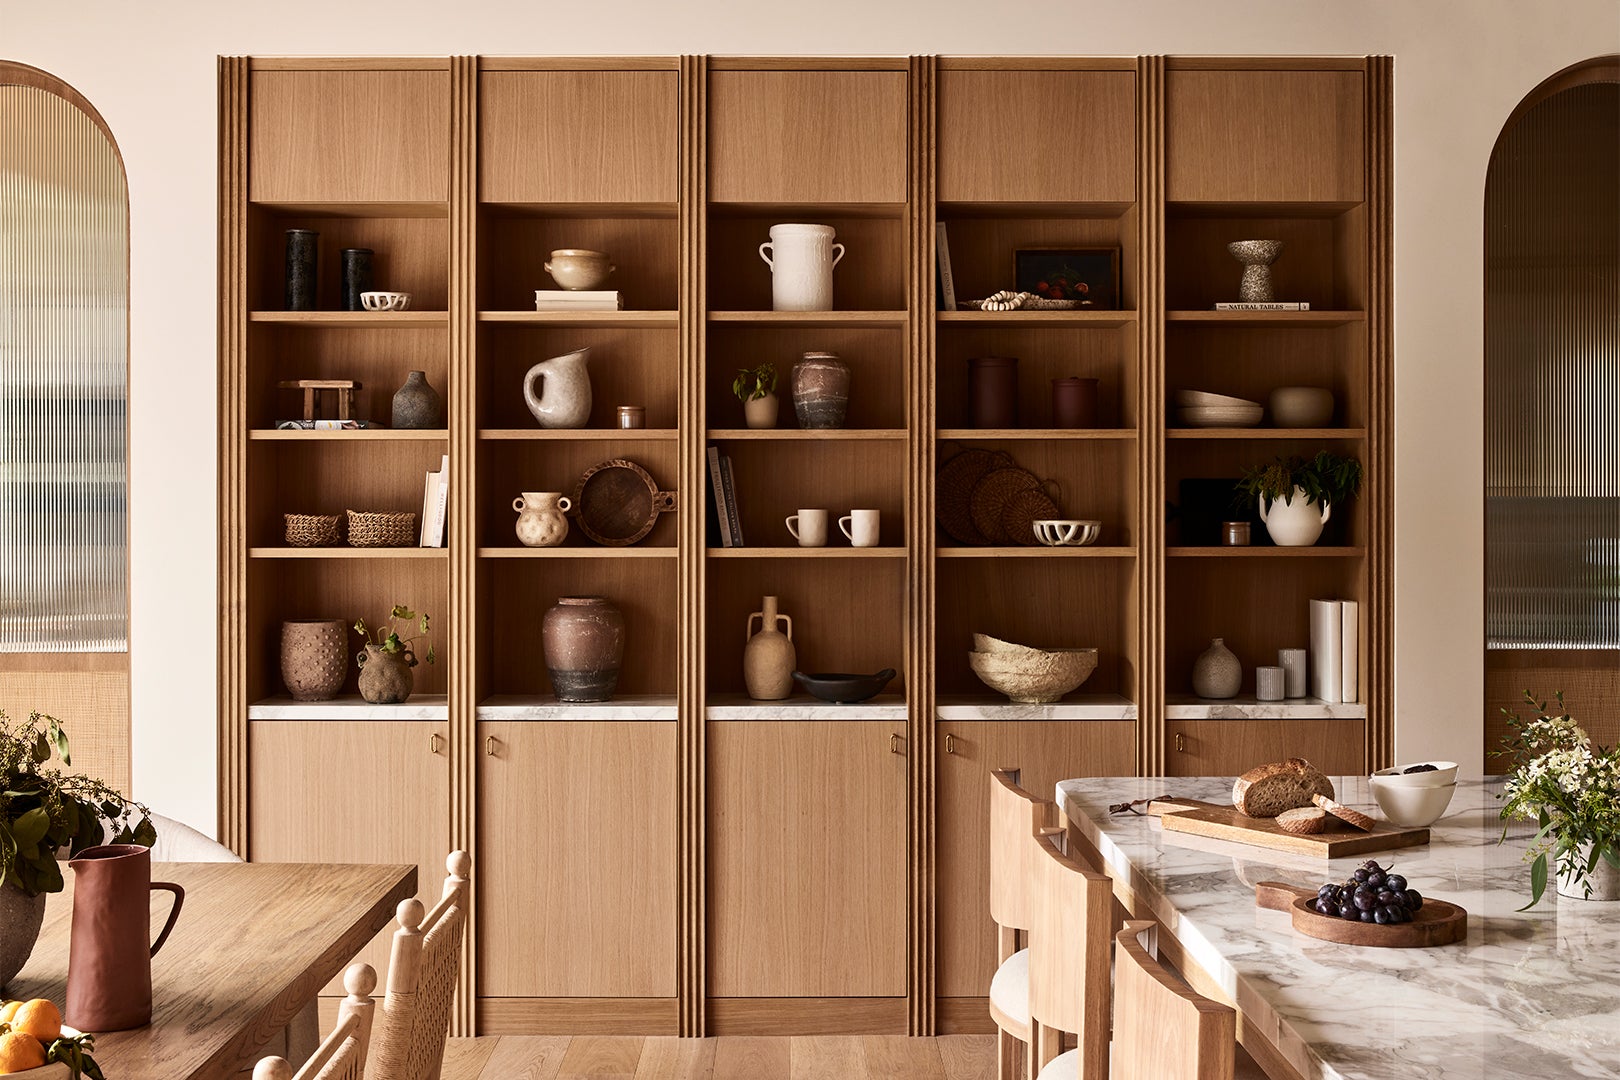 Open shelving in the kitchen and dining room